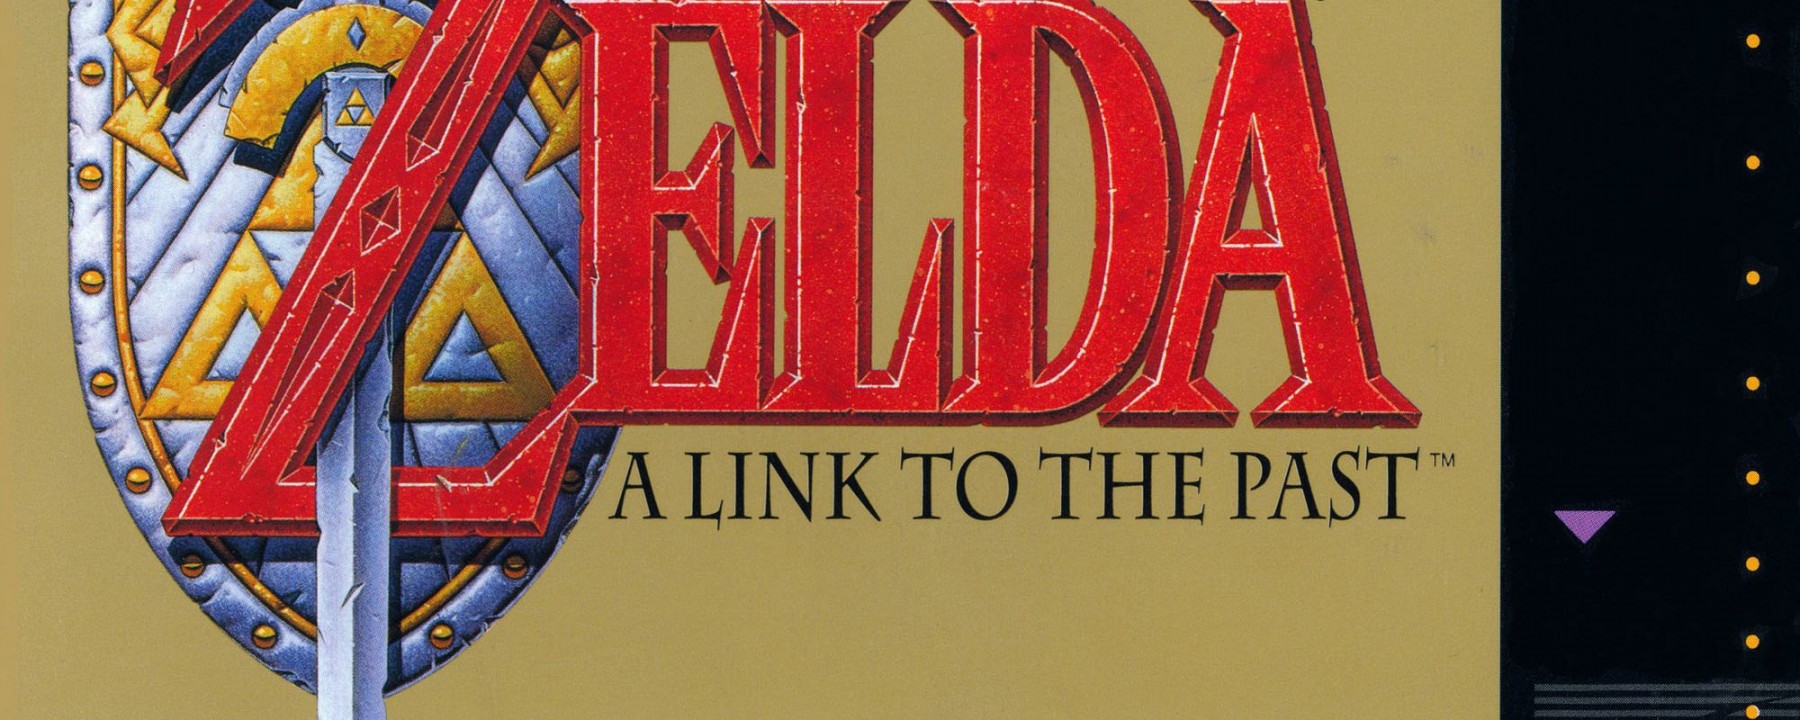 Game Retrô - The Legend of Zelda: A Link to the Past